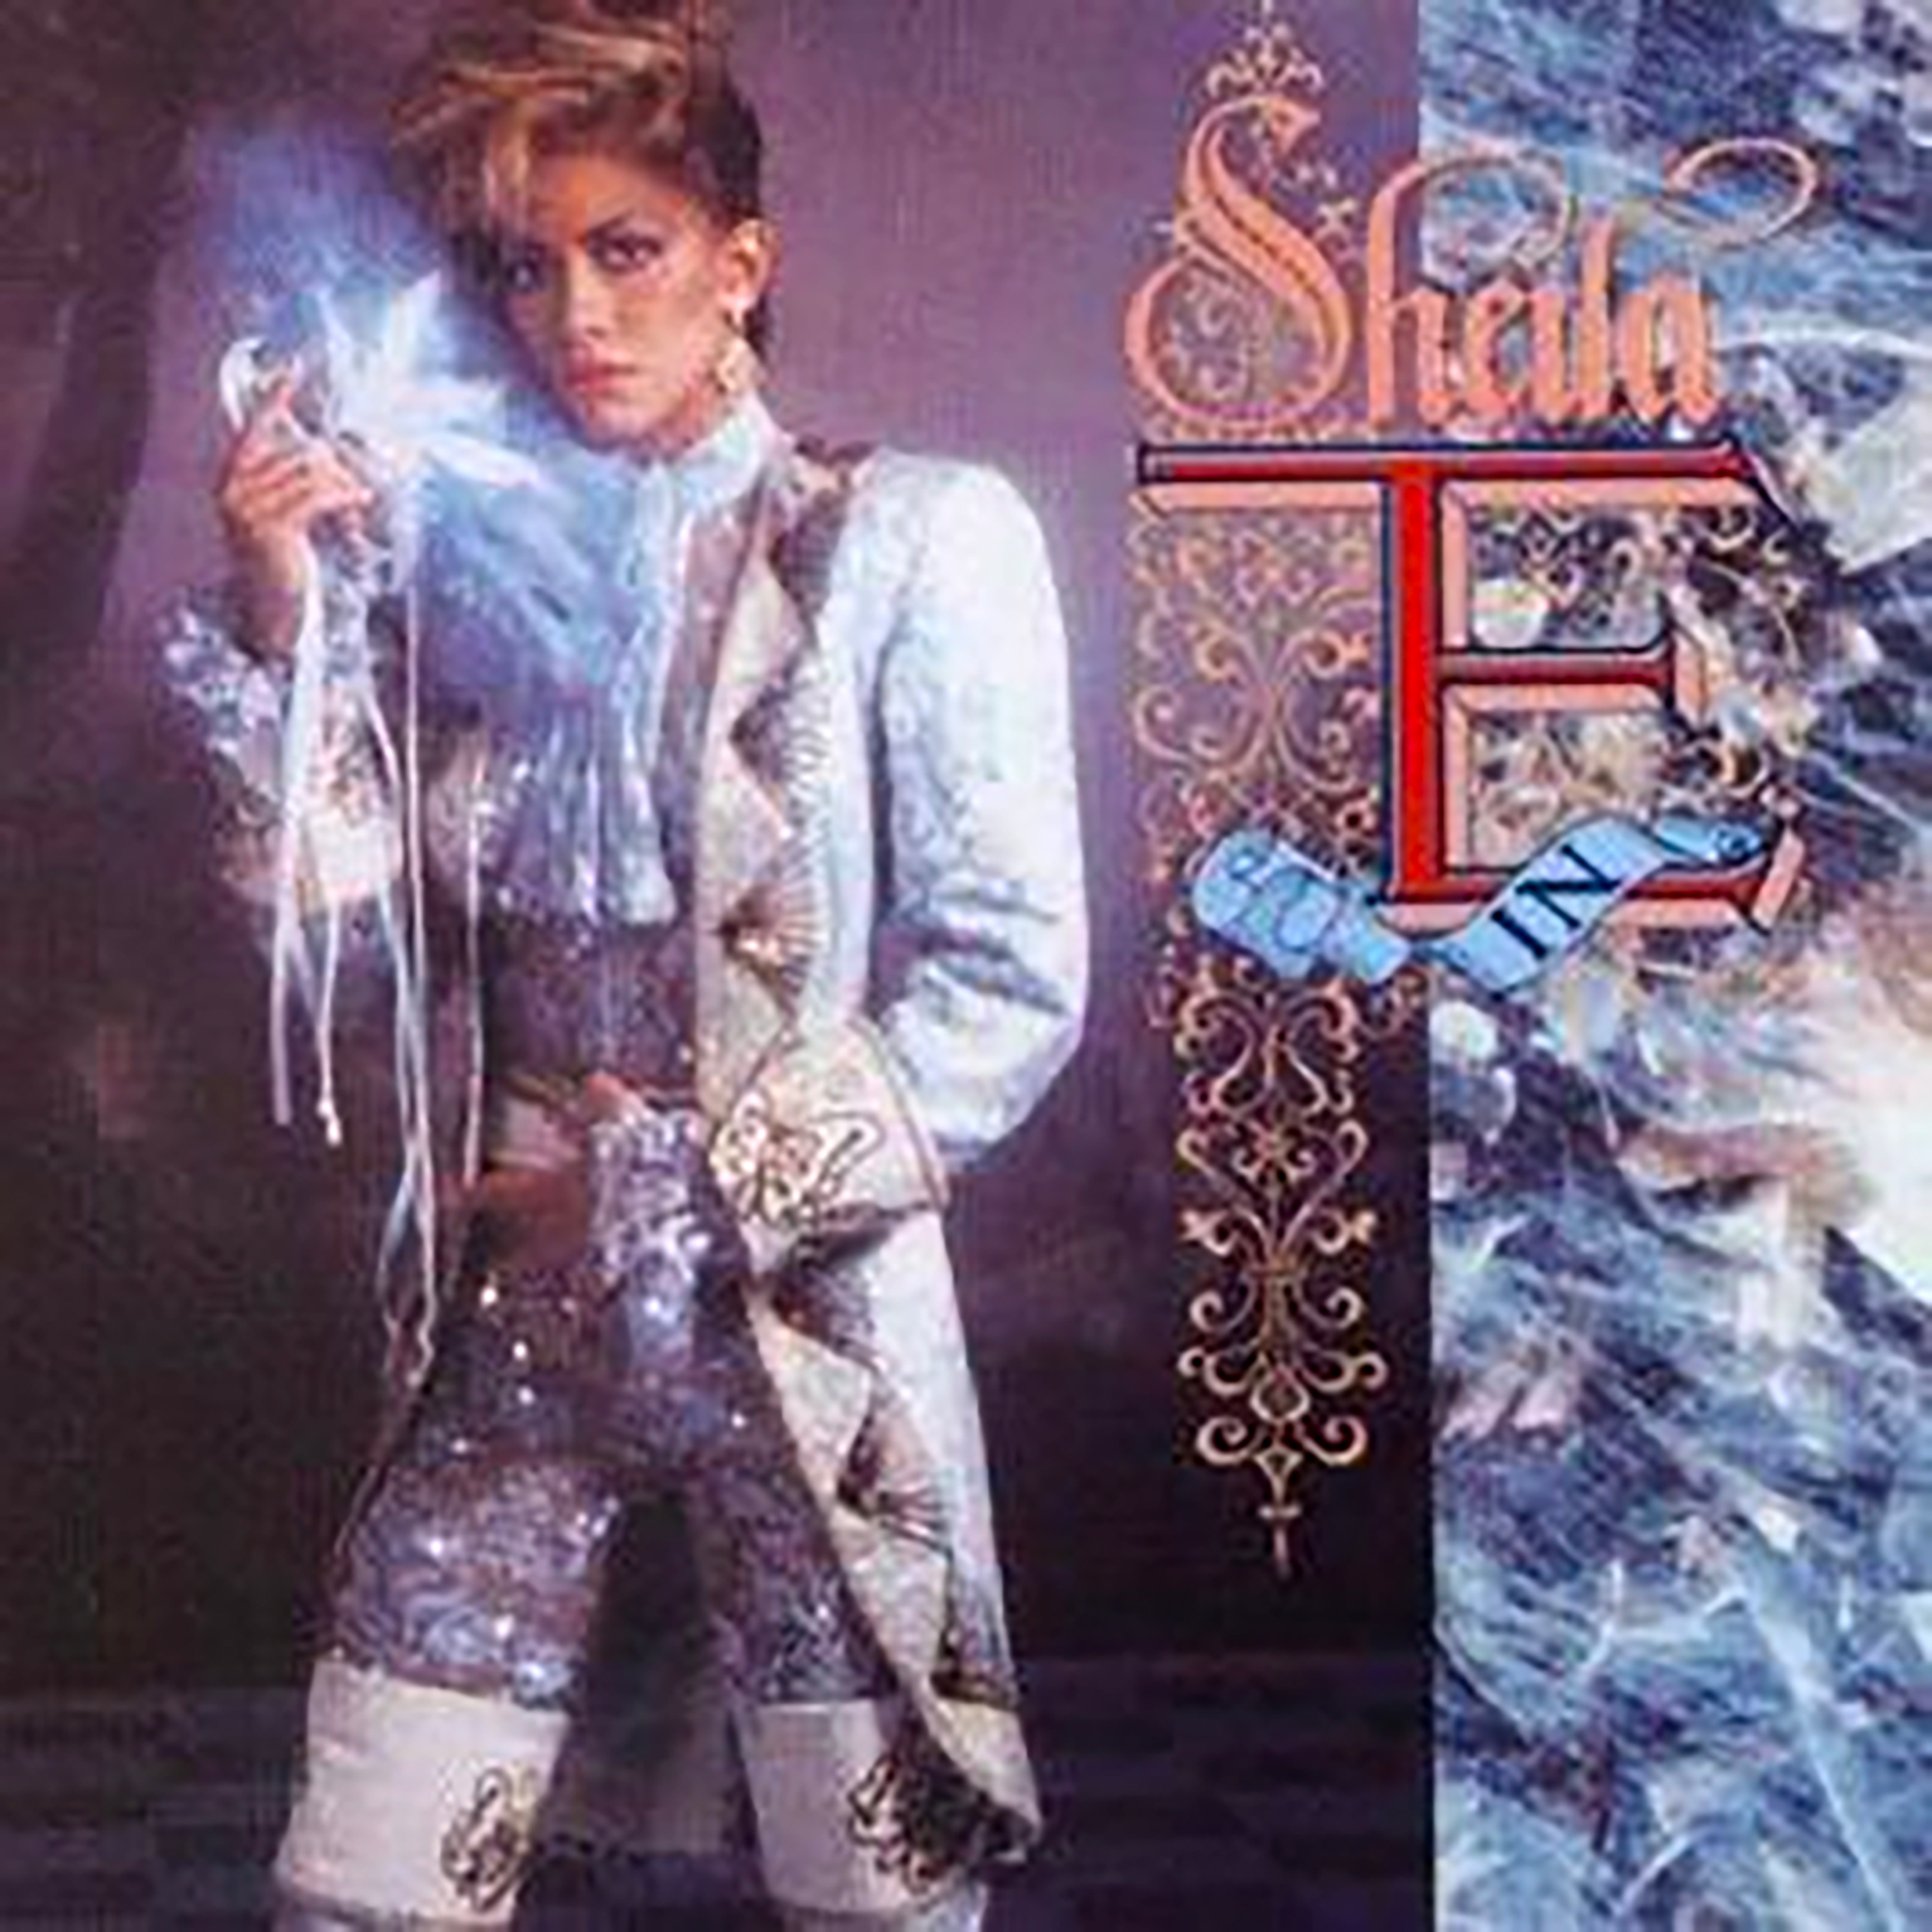 Lot #8026 Sheila E. Fabric Swatches and 'Moodboard' Designs for Album Cover Costumes - Image 6